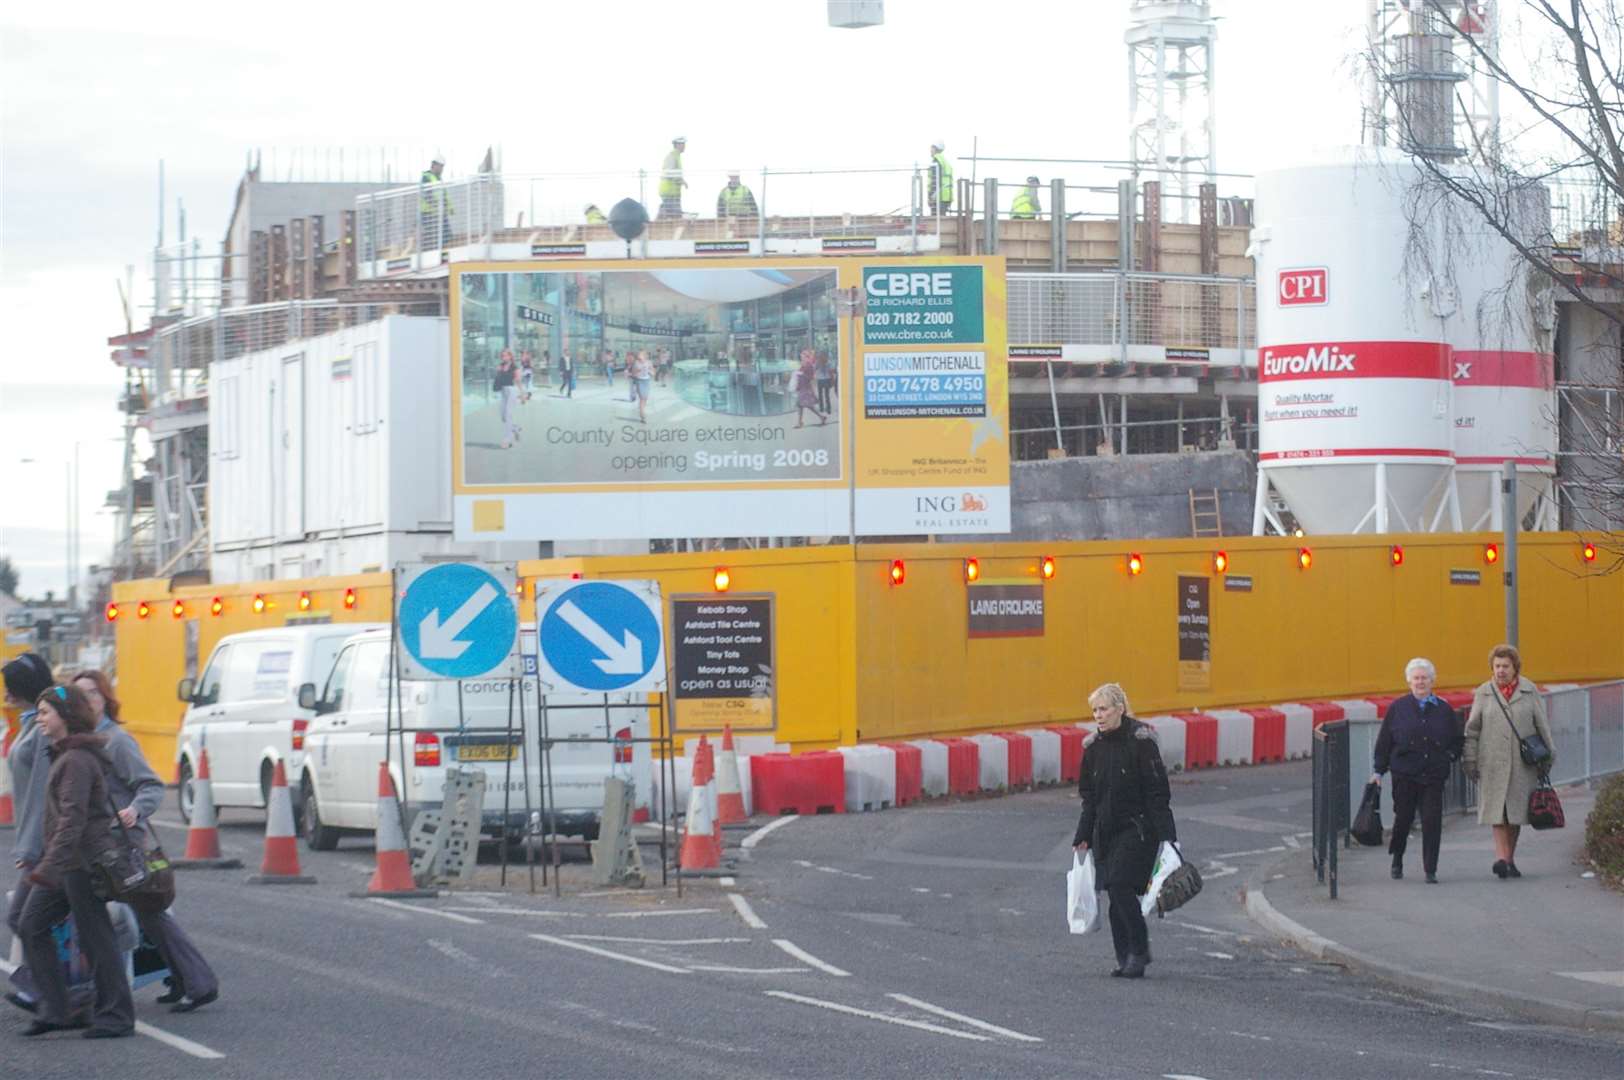 Work underway building the County Square extension in 2007